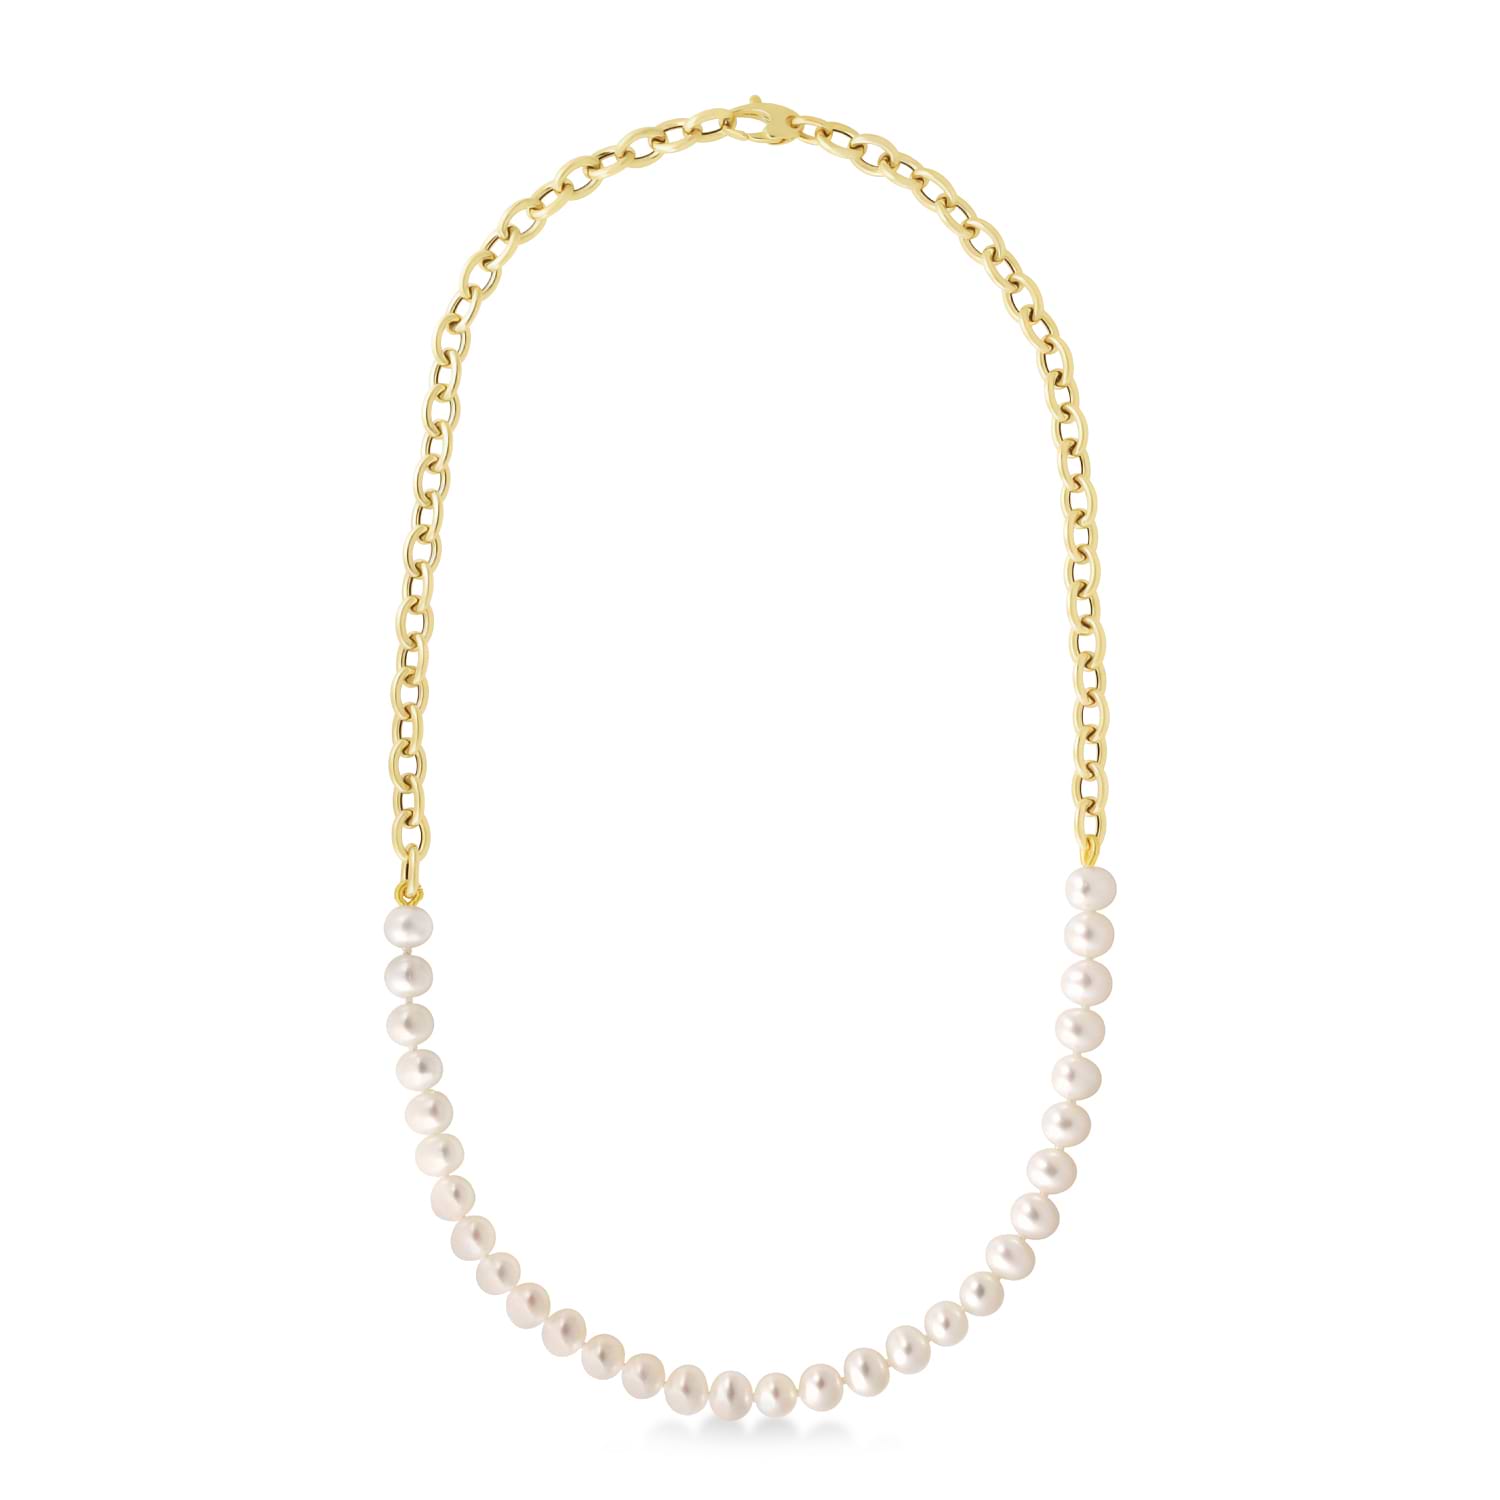 White Cultured Pearl String Rolo Link Necklace 14k Yellow Gold